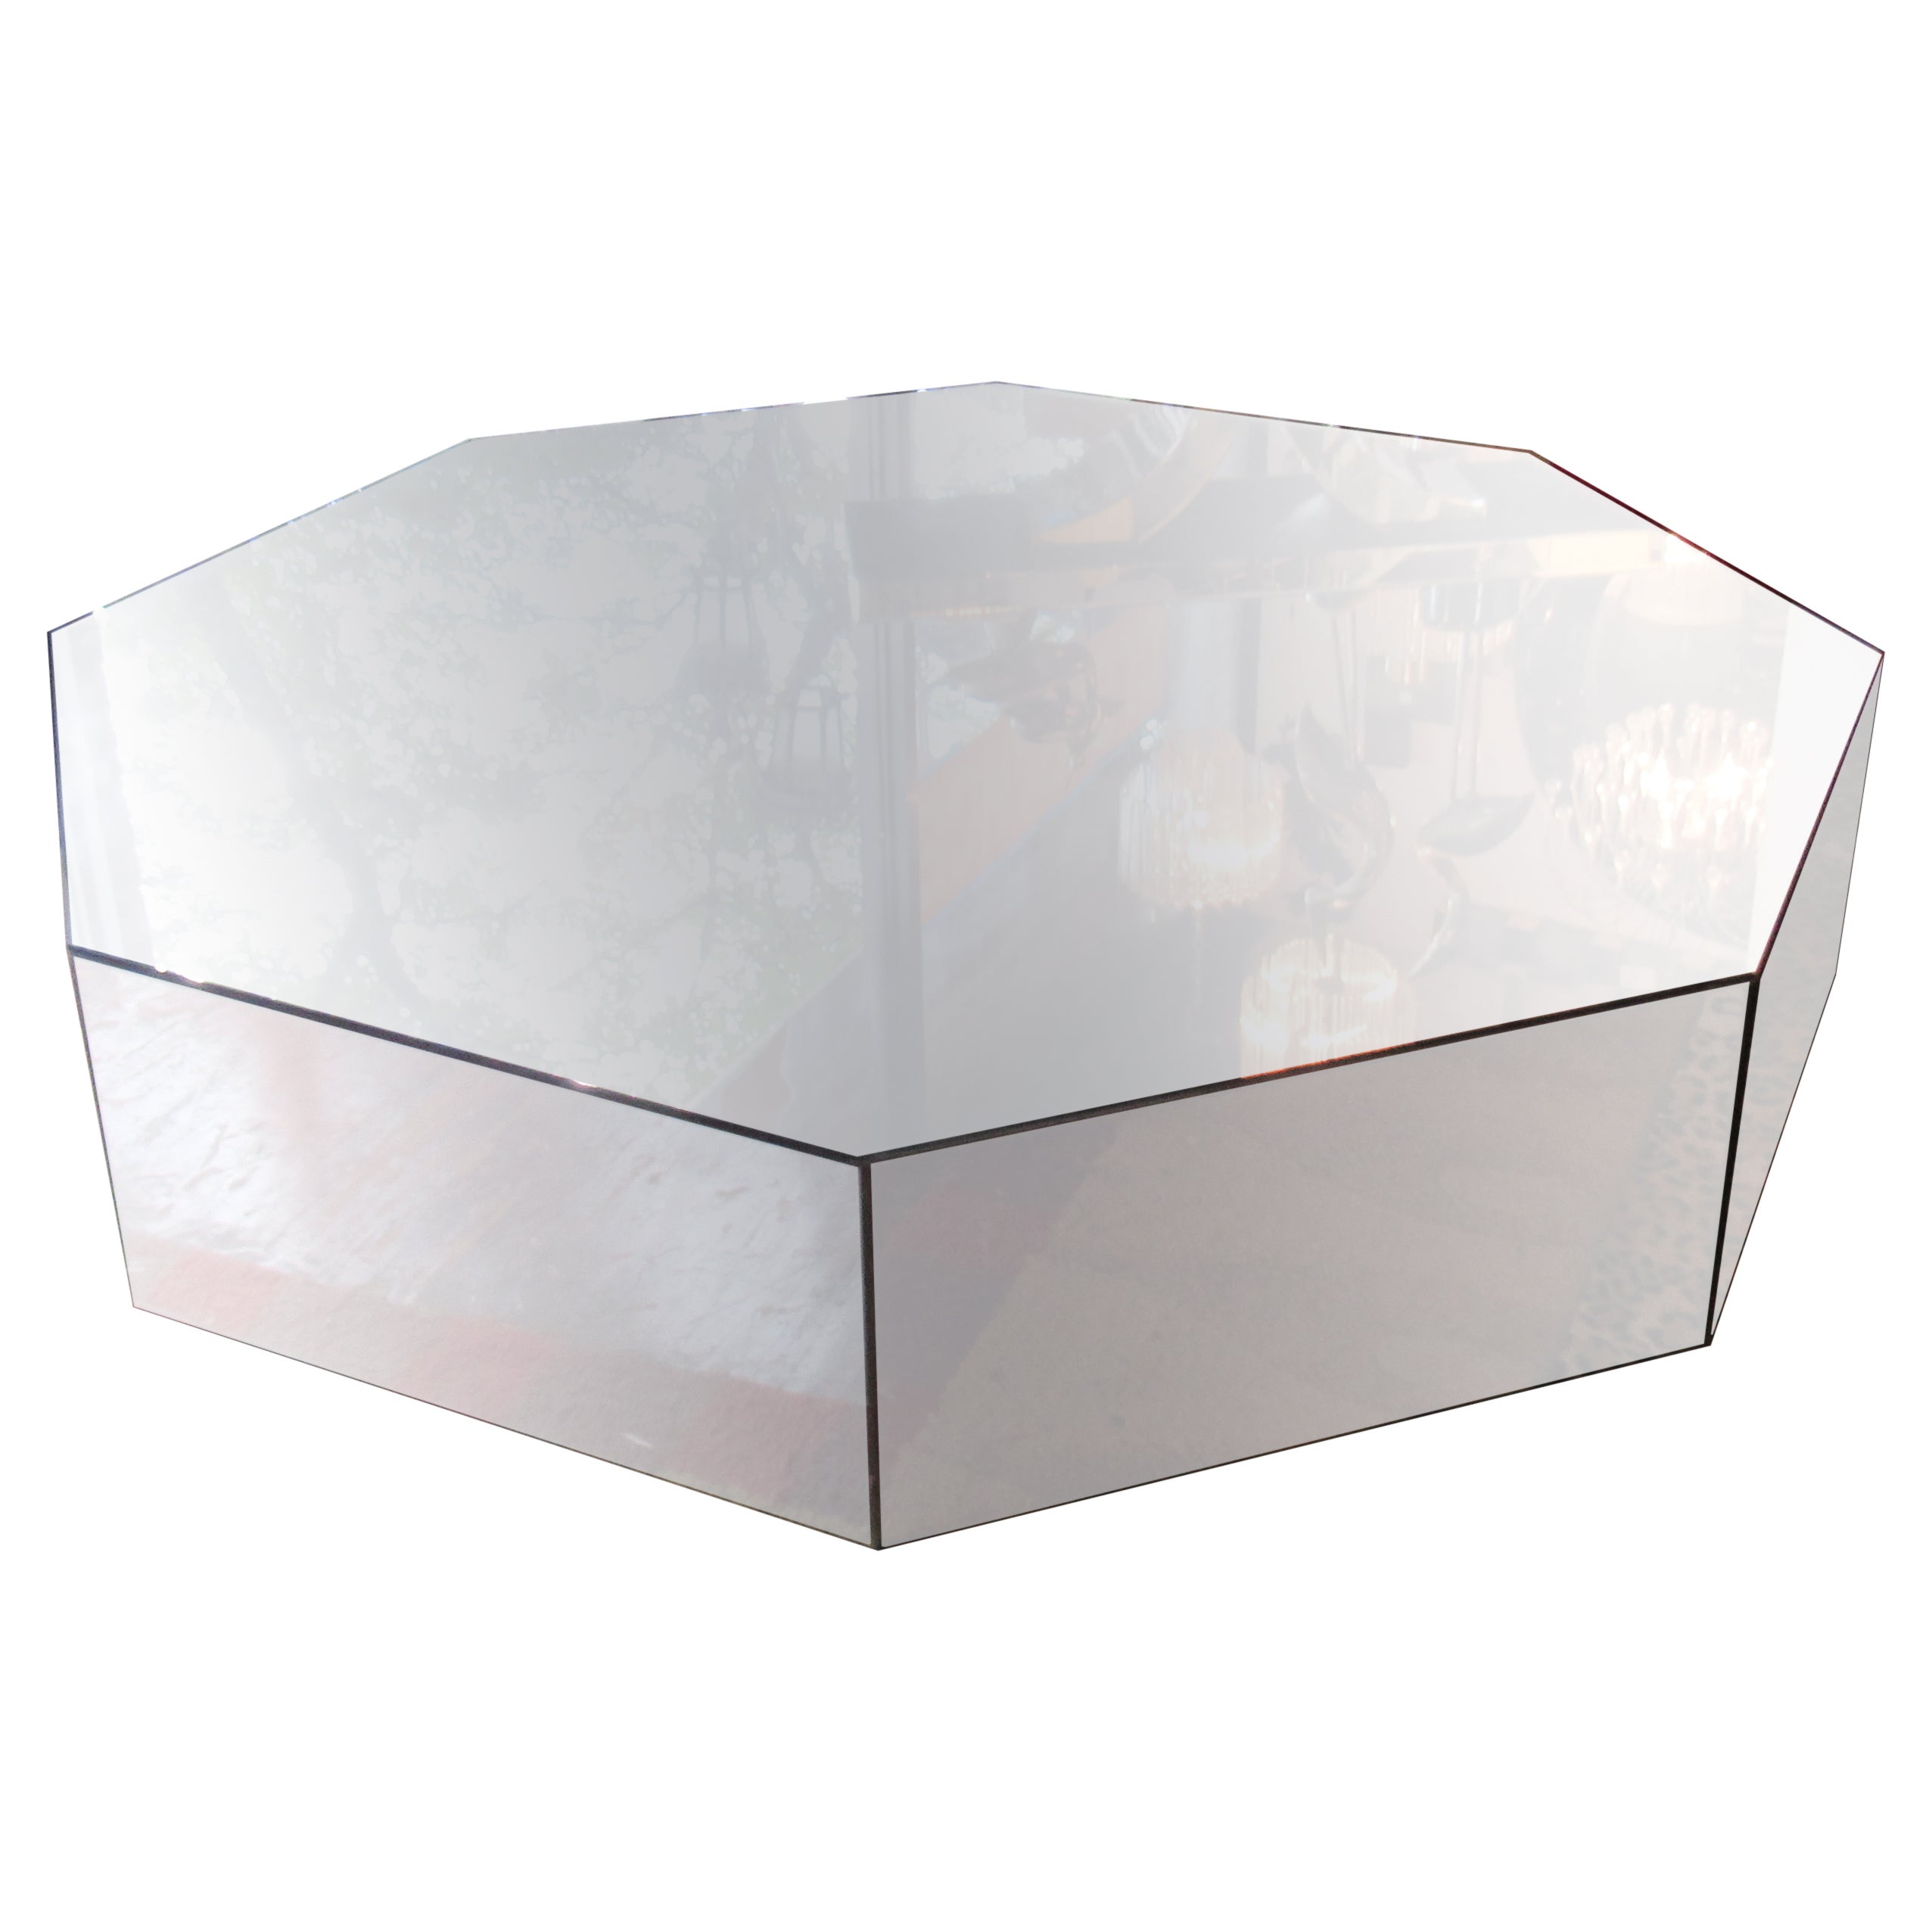 SALE! - Mirrored Glass Coffee Table